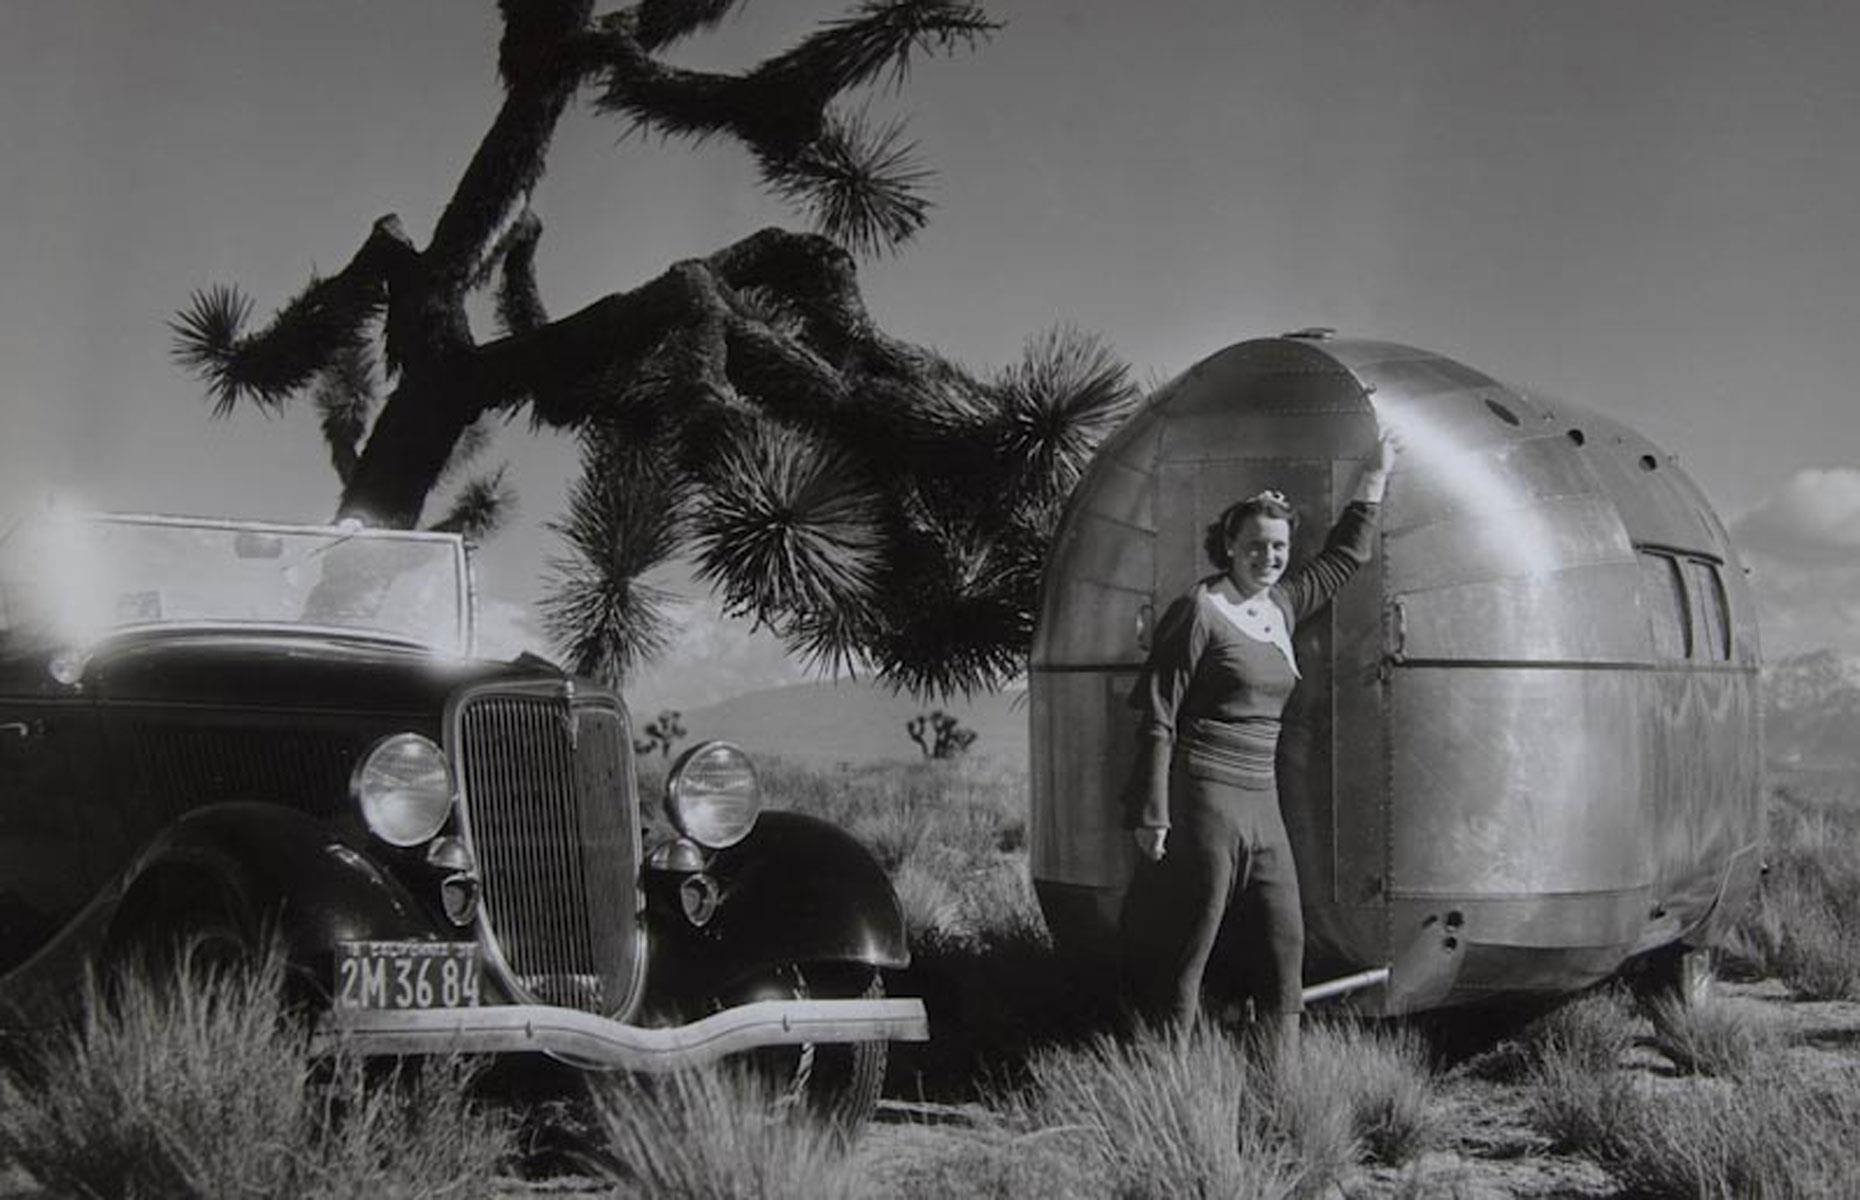 <p>During the 1930s, William Hawley Bowlus, an engineer who worked on the famous Spirit of St Louis airplane, created the Road Chief – an aerodynamic Streamline Moderne-style trailer in gleaming aluminum.</p>  <p><a href="http://bit.ly/3roL4wv"><strong>Love this? Follow our Facebook page for more travel inspiration</strong></a></p>